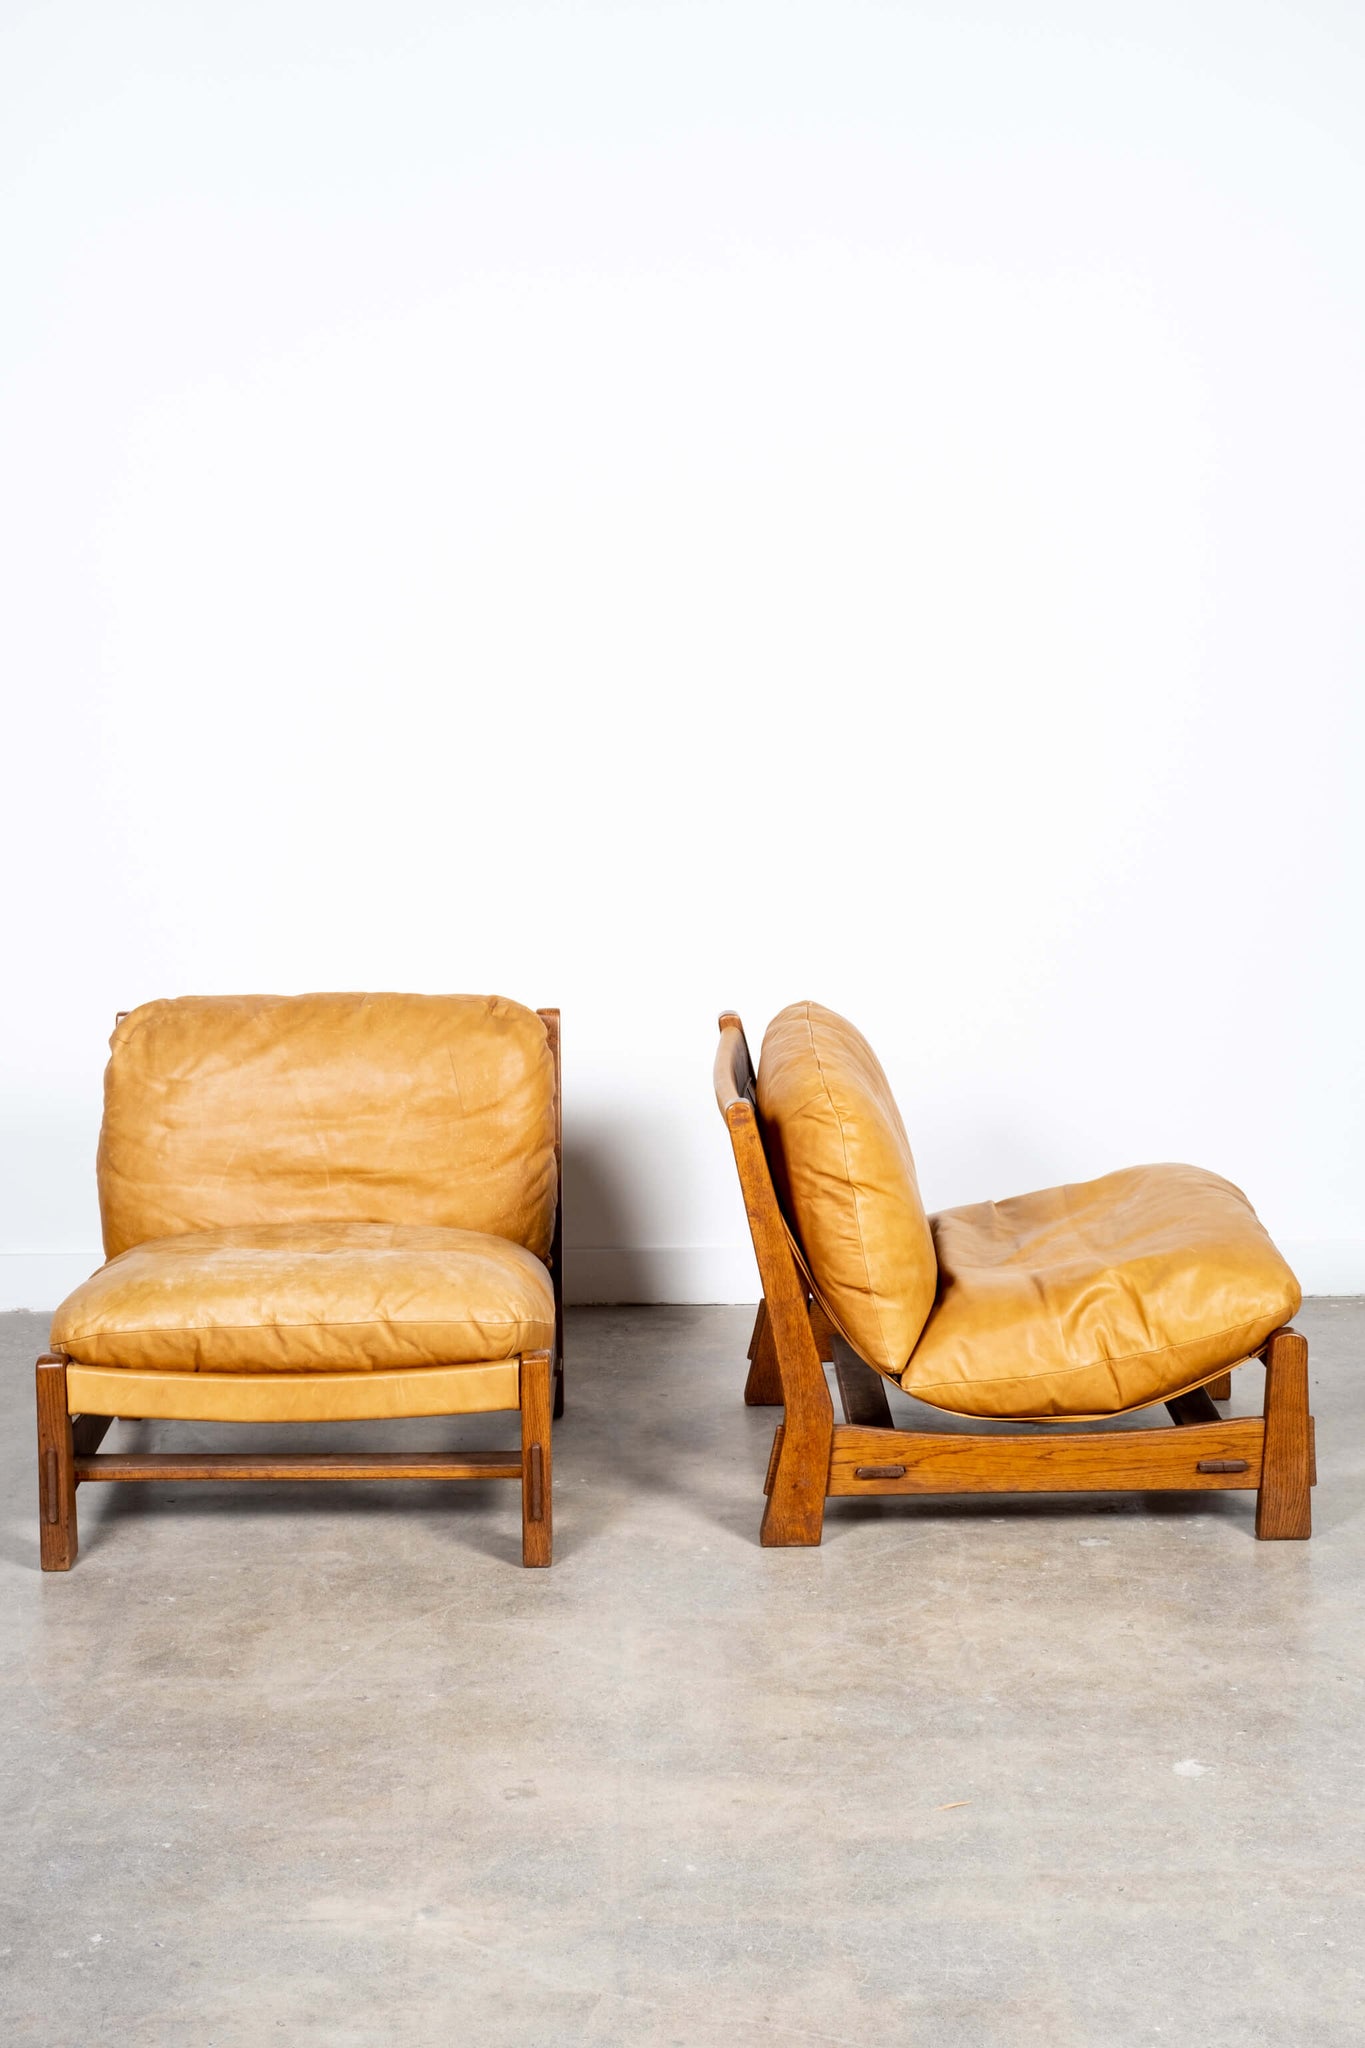 Pair of Vintage Leather Sling Chairs with Oak Frame, front and side view